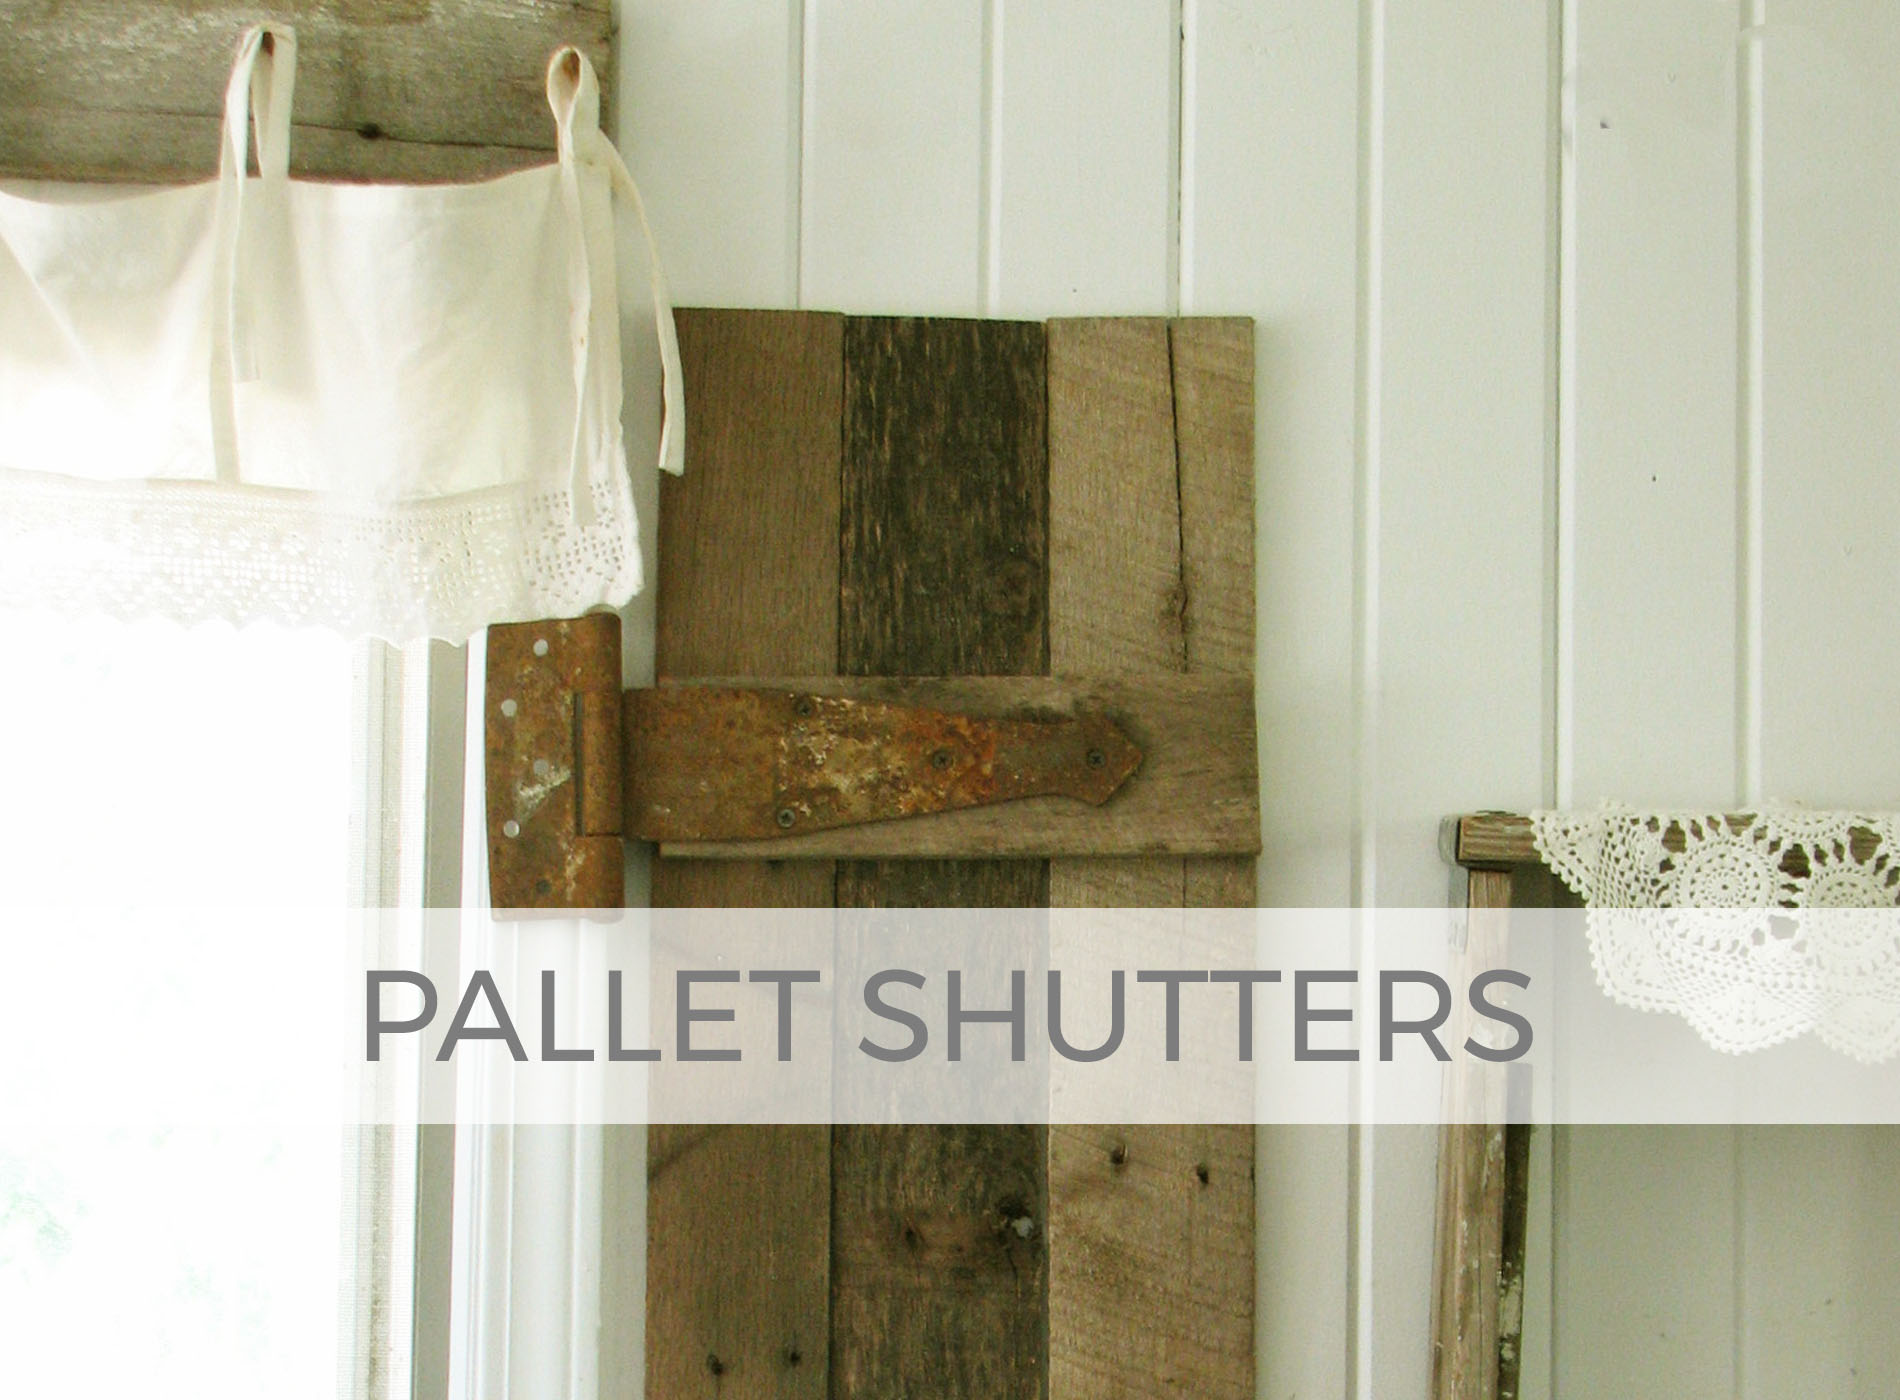 Grab those pallets and make shutters for farmhouse decor by Larissa of Prodigal Pieces | prodigalpieces.com #prodigalpieces